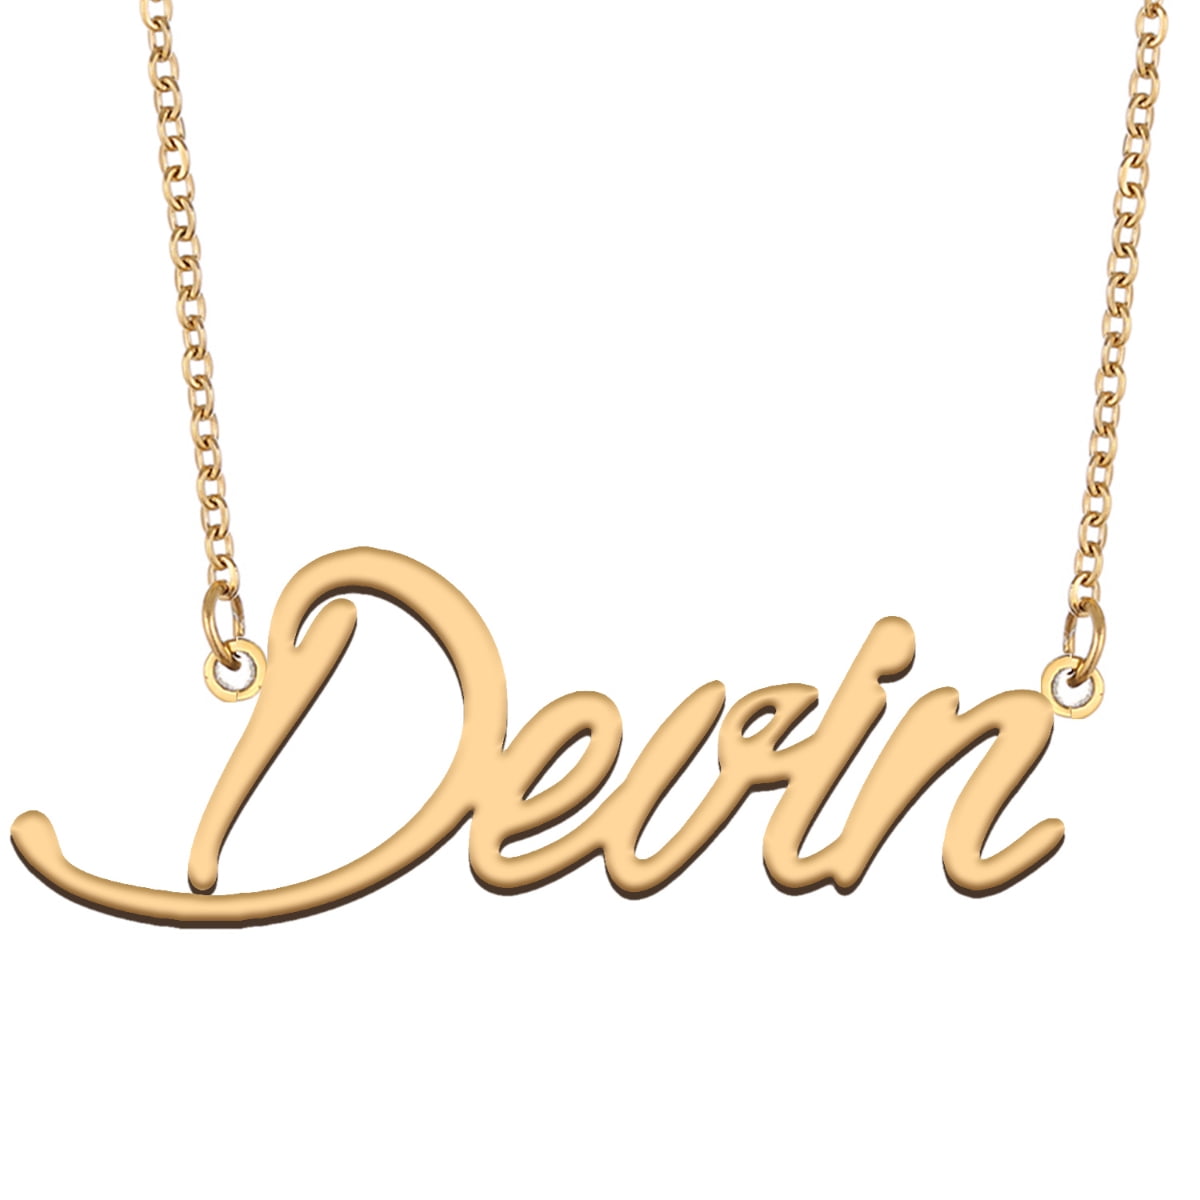 Nola Gold Plated Necklace Custom Name Necklace Personalized Name Jewelry Party Necklace Gift for Her Necklace with Name